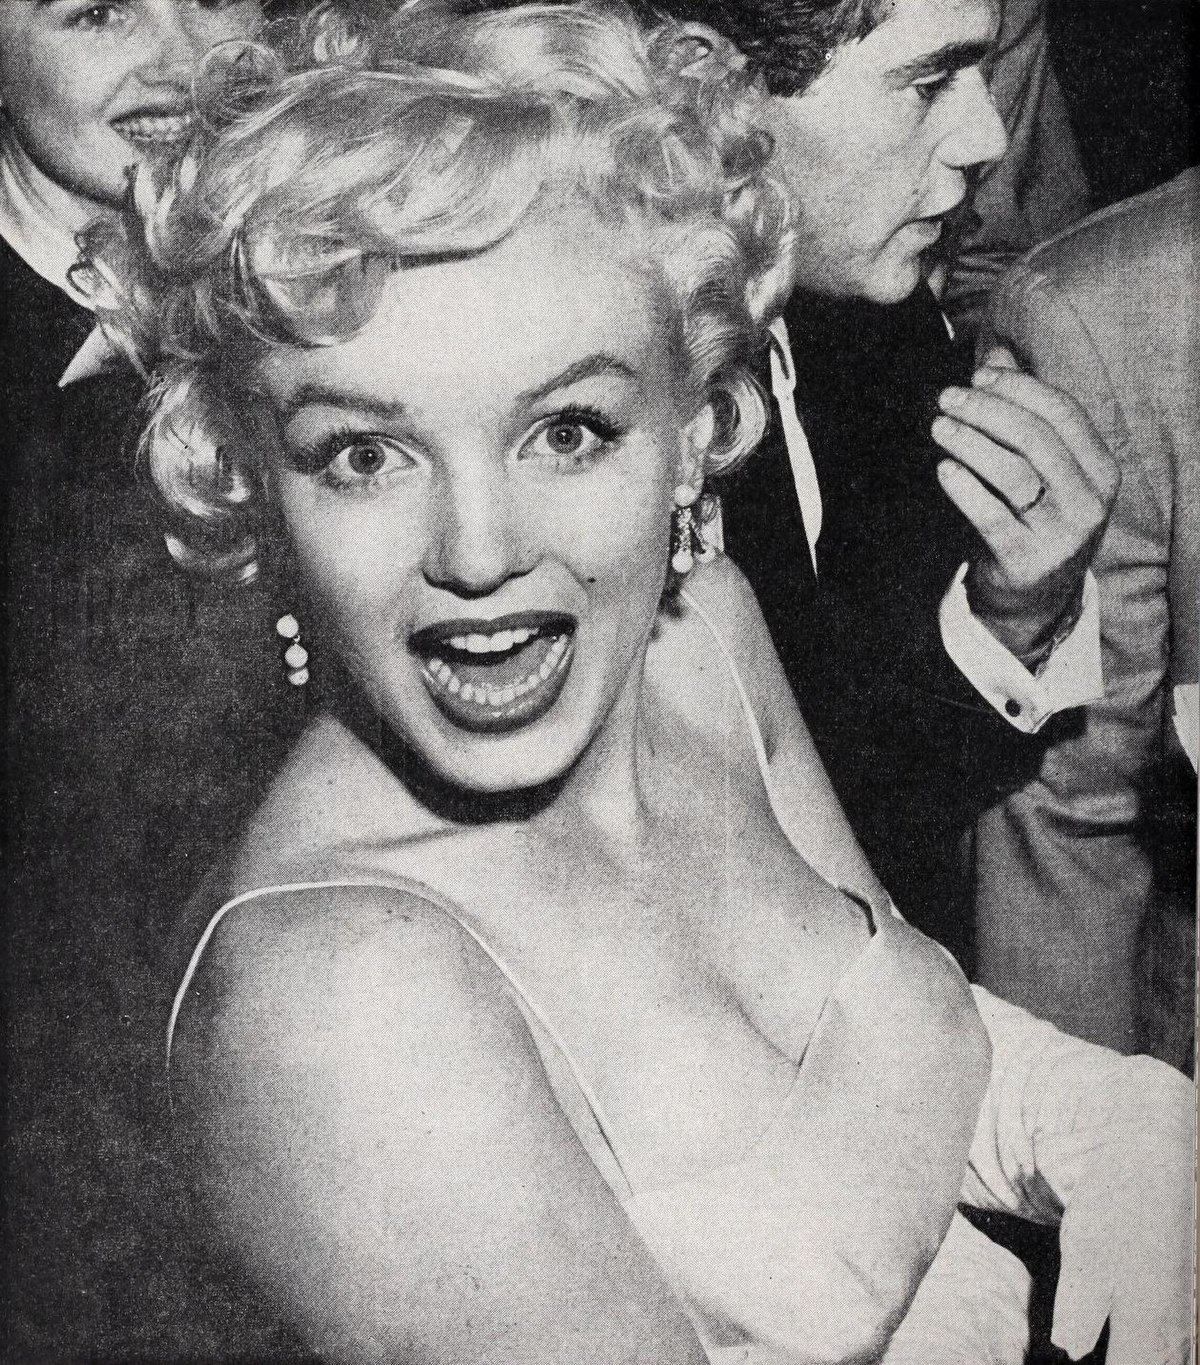 File:Marilyn Monroe at a party, 1955.jpg - Wikipedia